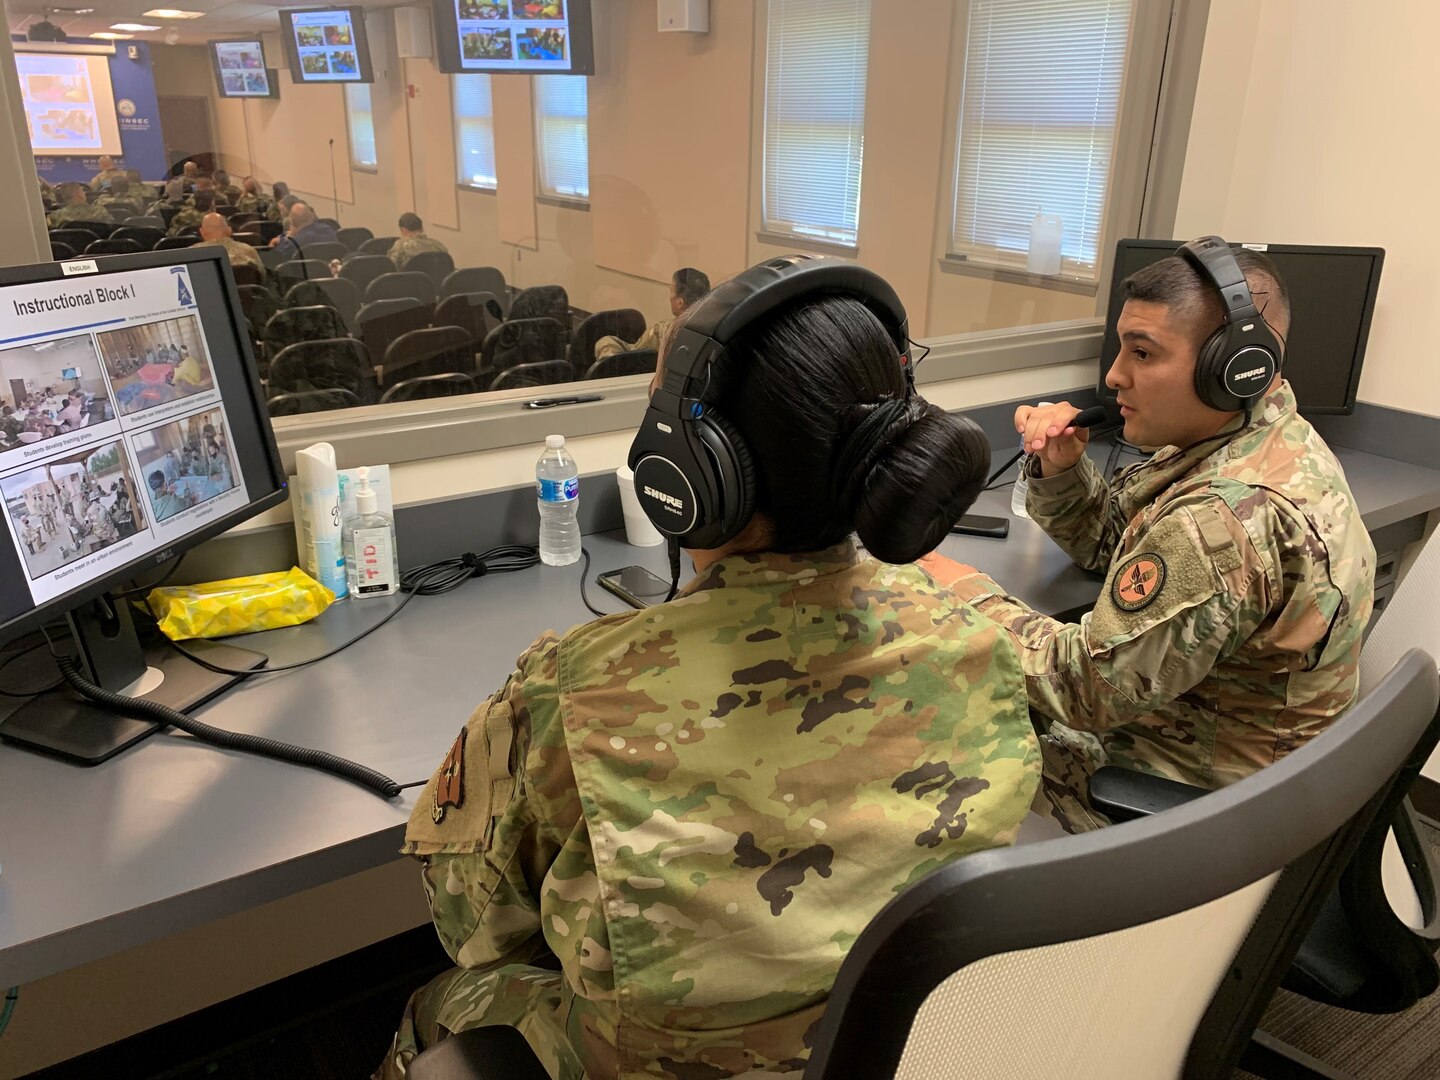 Two Air Force NCOs sitting at computer console.